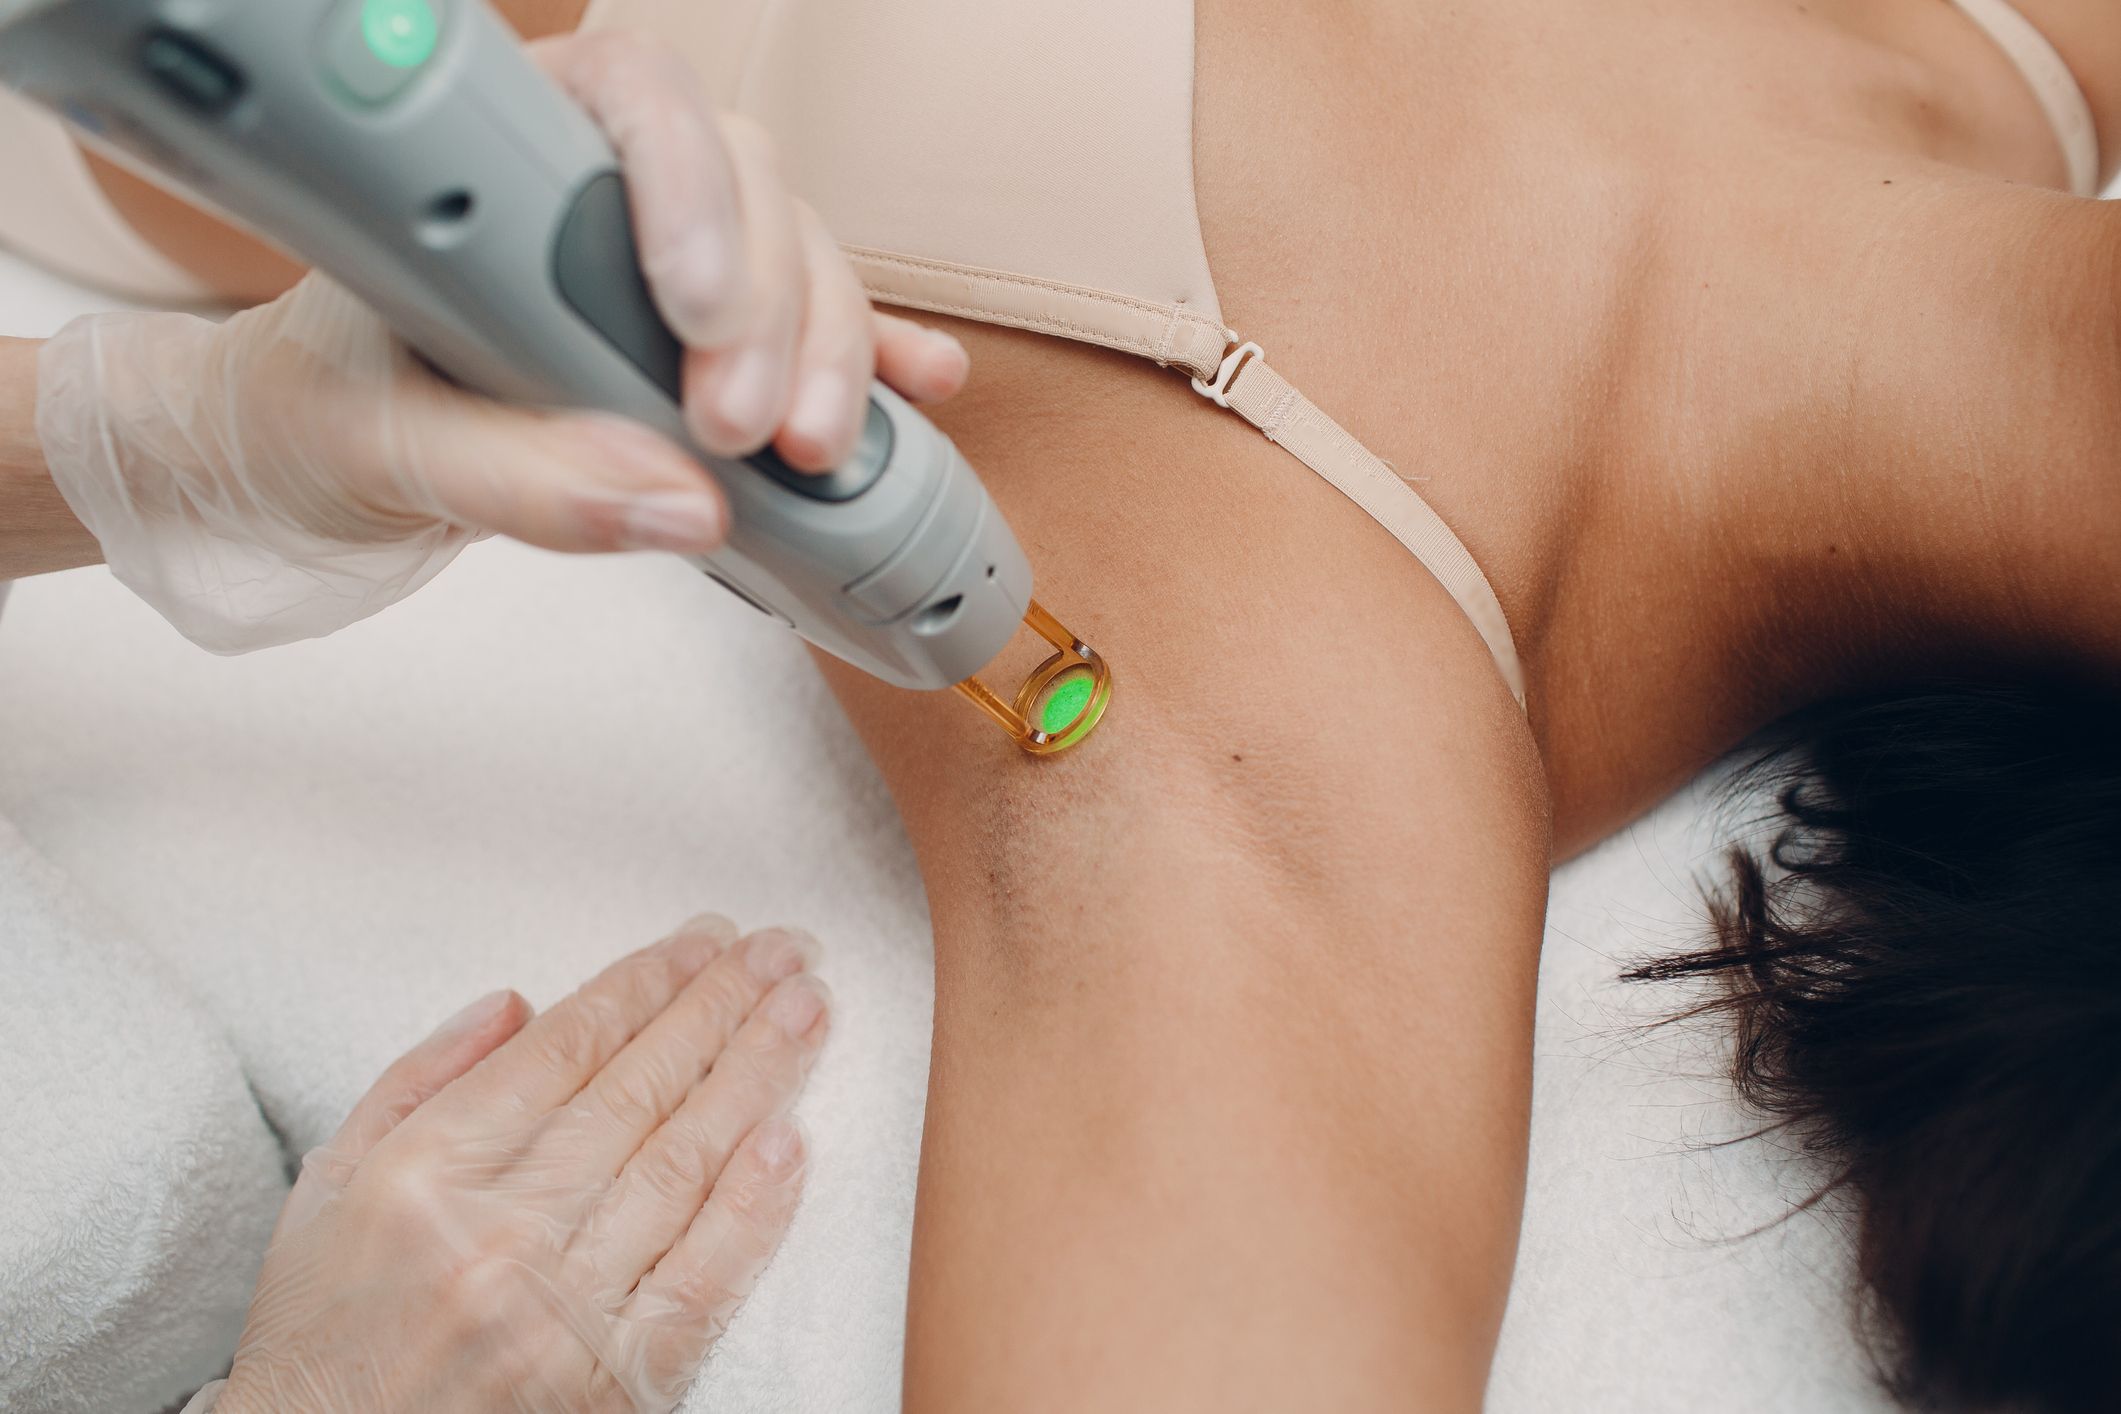 Aggregate more than 141 alternatives to laser hair removal